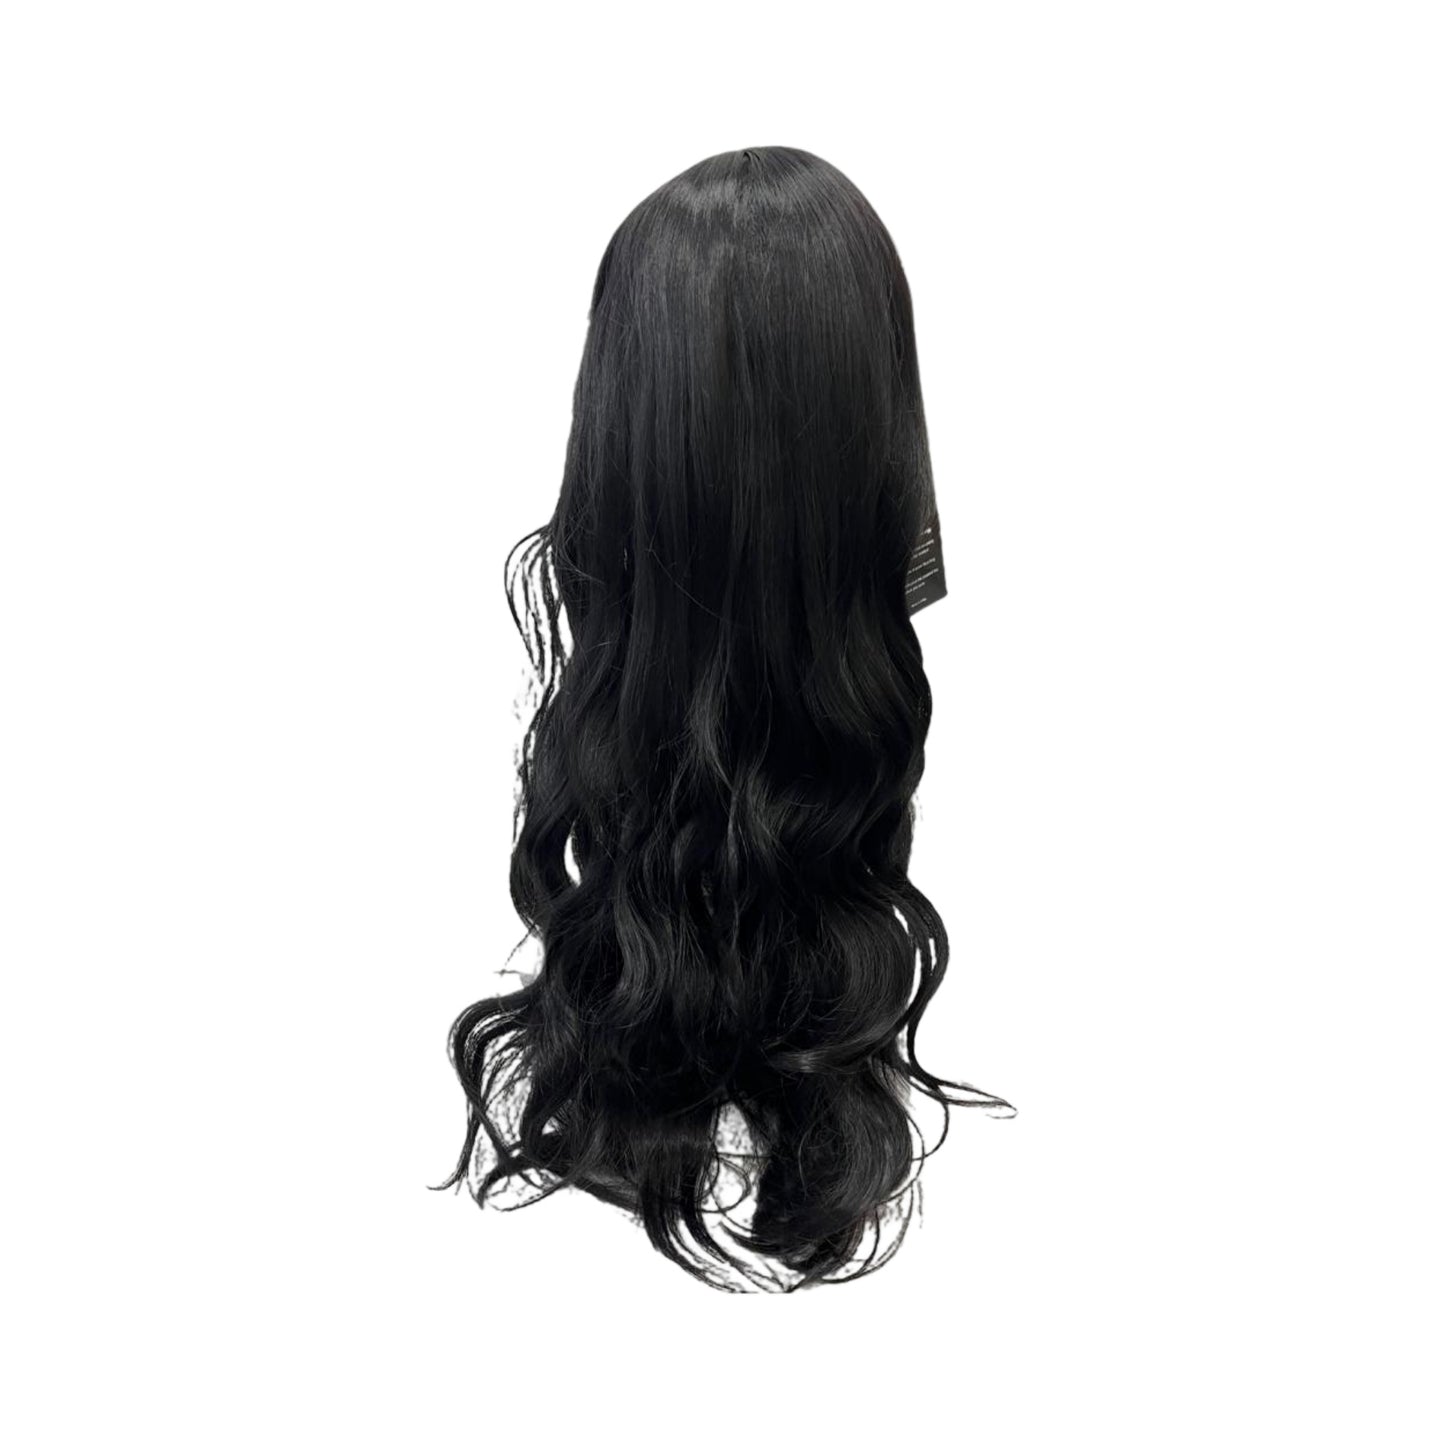 Long Synthetic Wig (#1) | A-004 | 28 inches | Durable | Breathable Cap